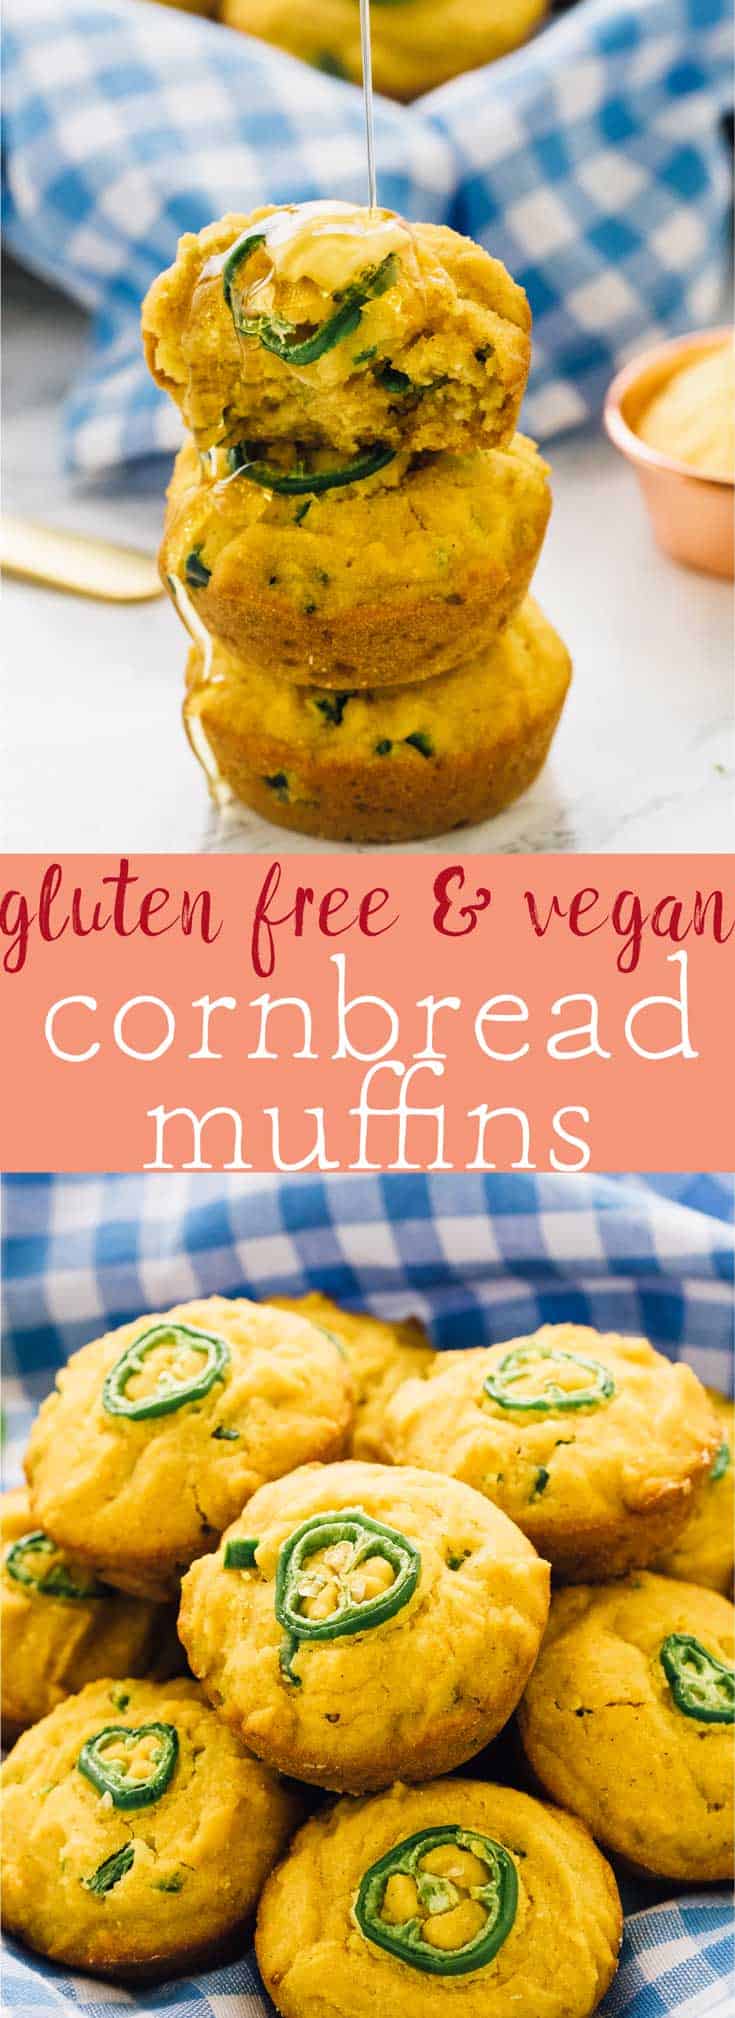 These Gluten Free Cornbread Muffins are moist and tender and made with jalapeños! They have a delicious spicy kick, are vegan and are made with healthier ingredients!